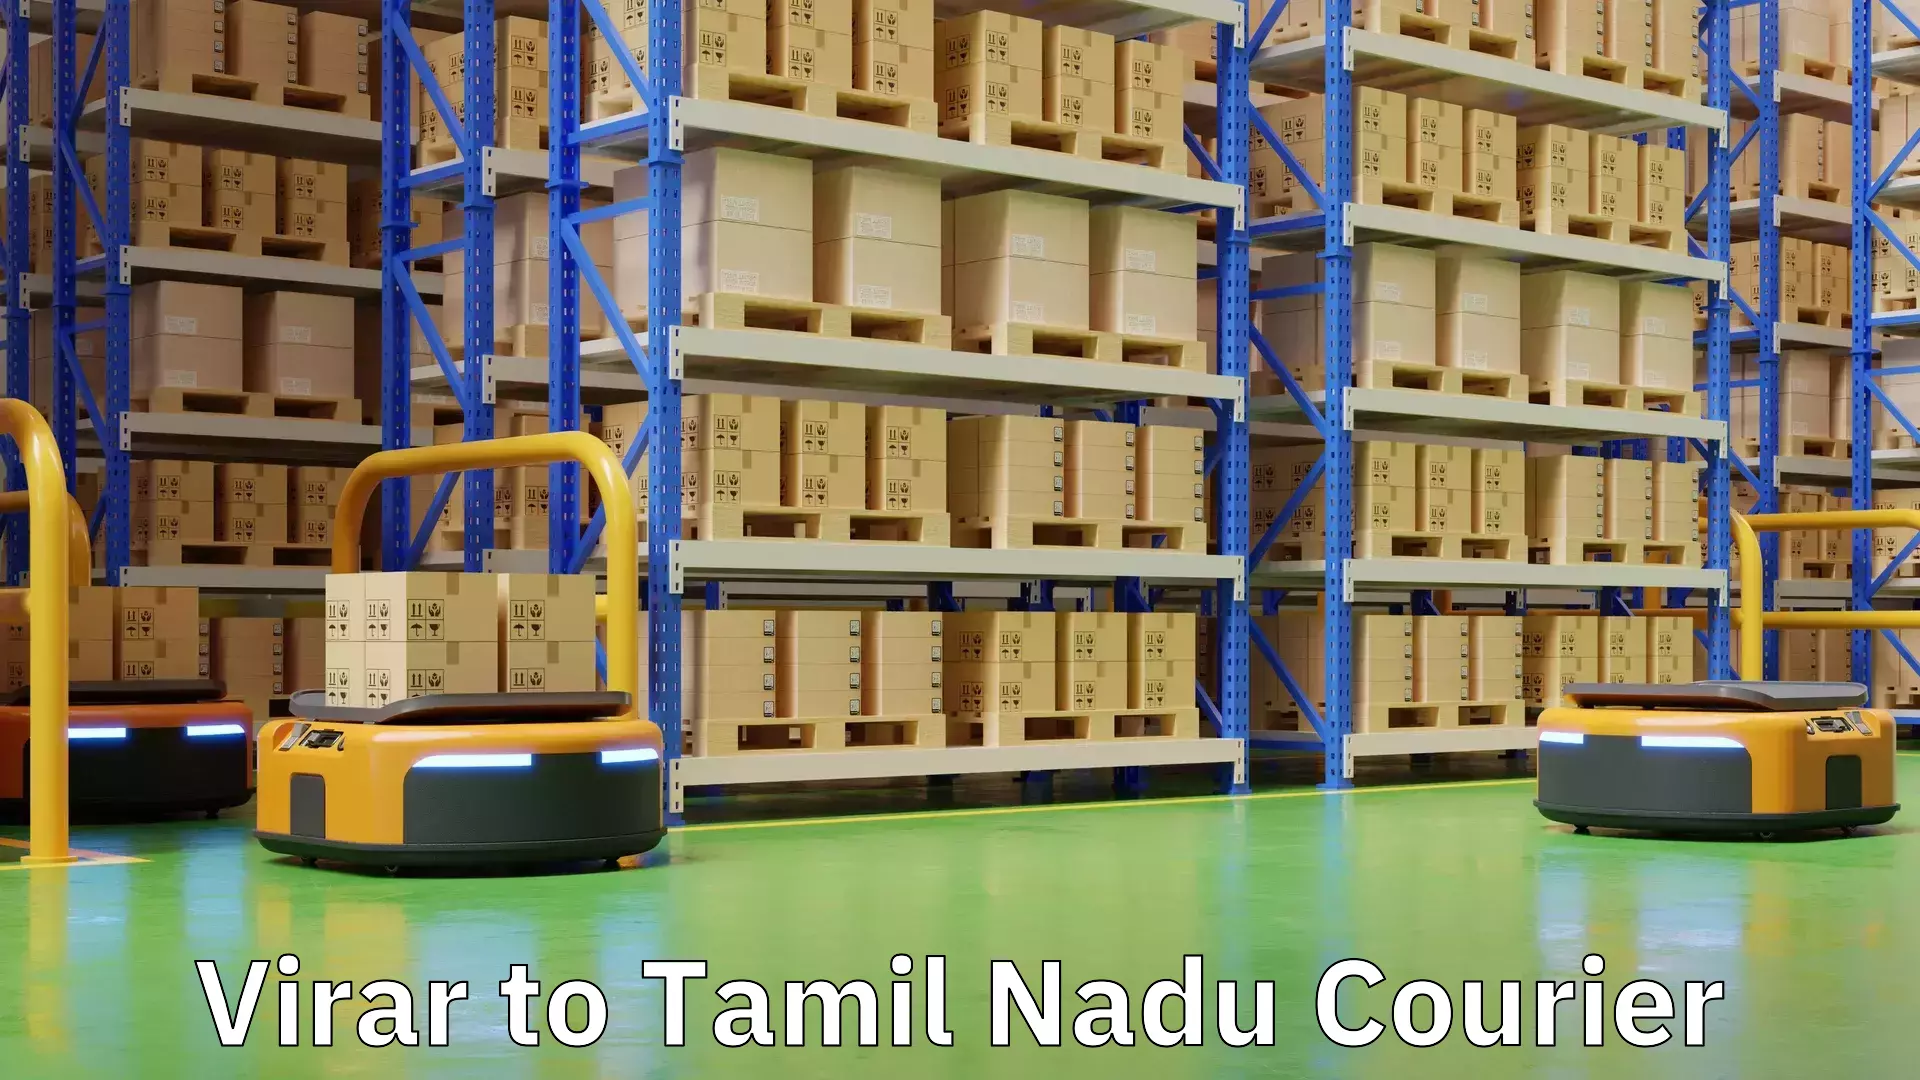 Round-the-clock parcel delivery in Virar to Tamil Nadu